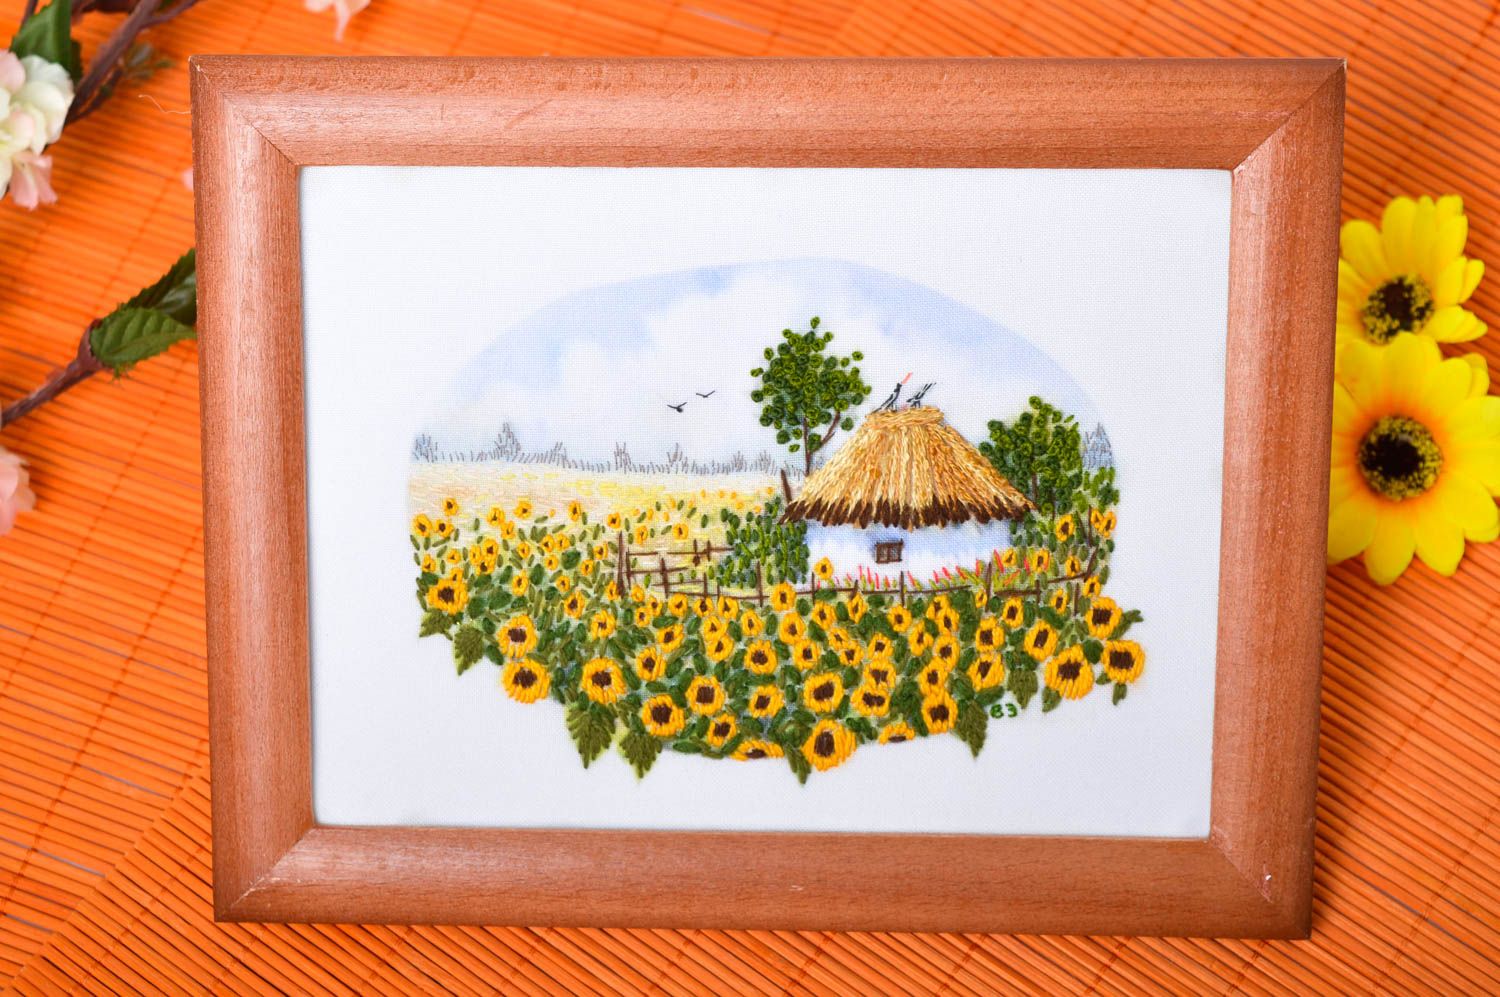 Handmade wall picture with embroidery stitch embroidery decorative use only photo 1